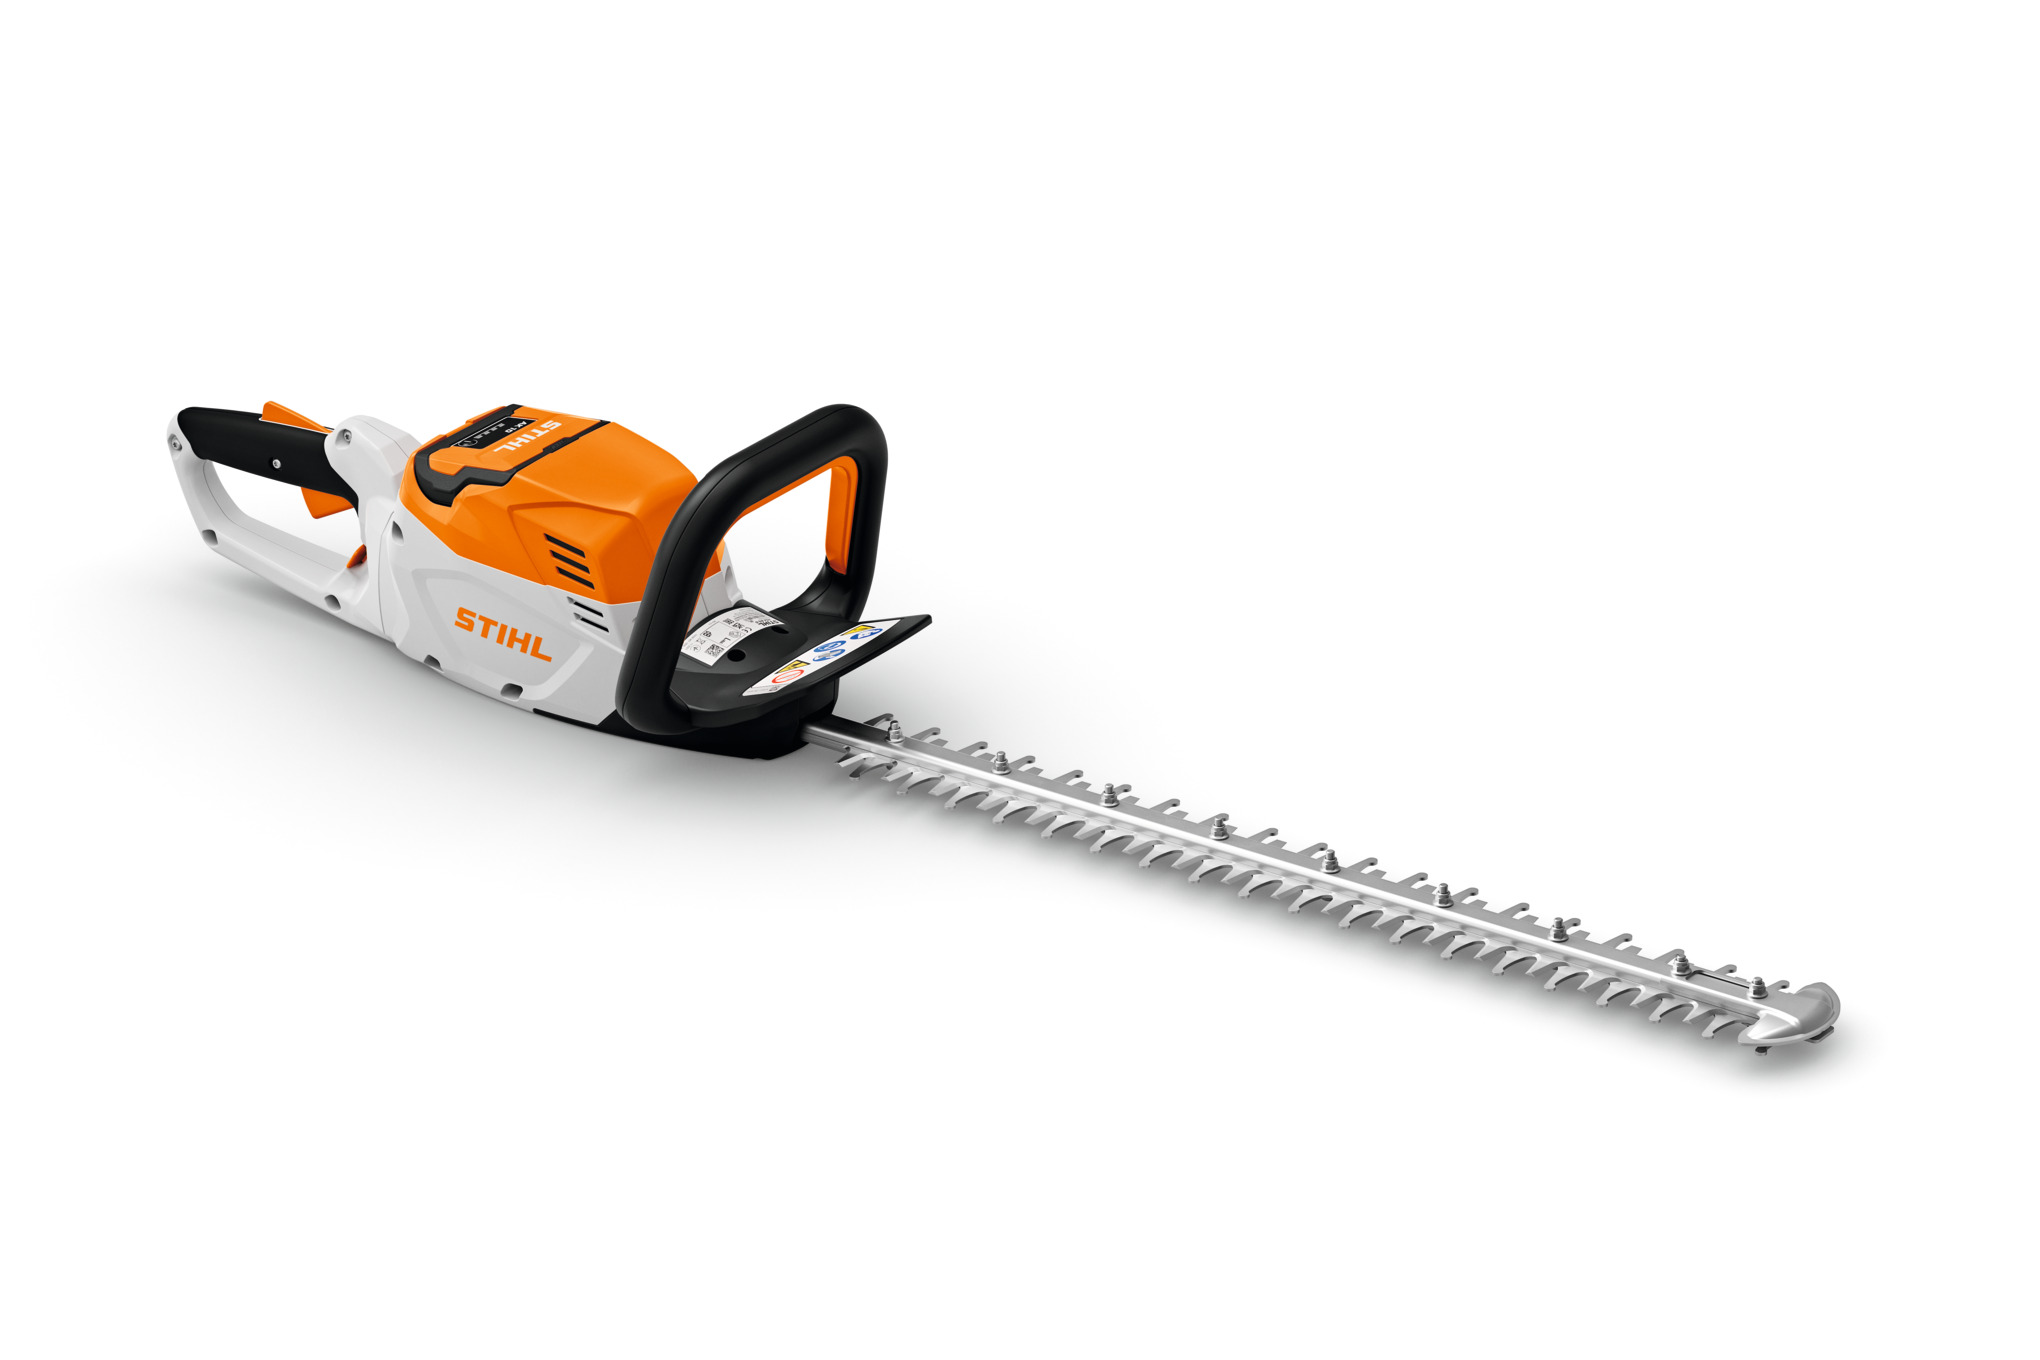 HSA 60 Cordless Hedge Trimmer